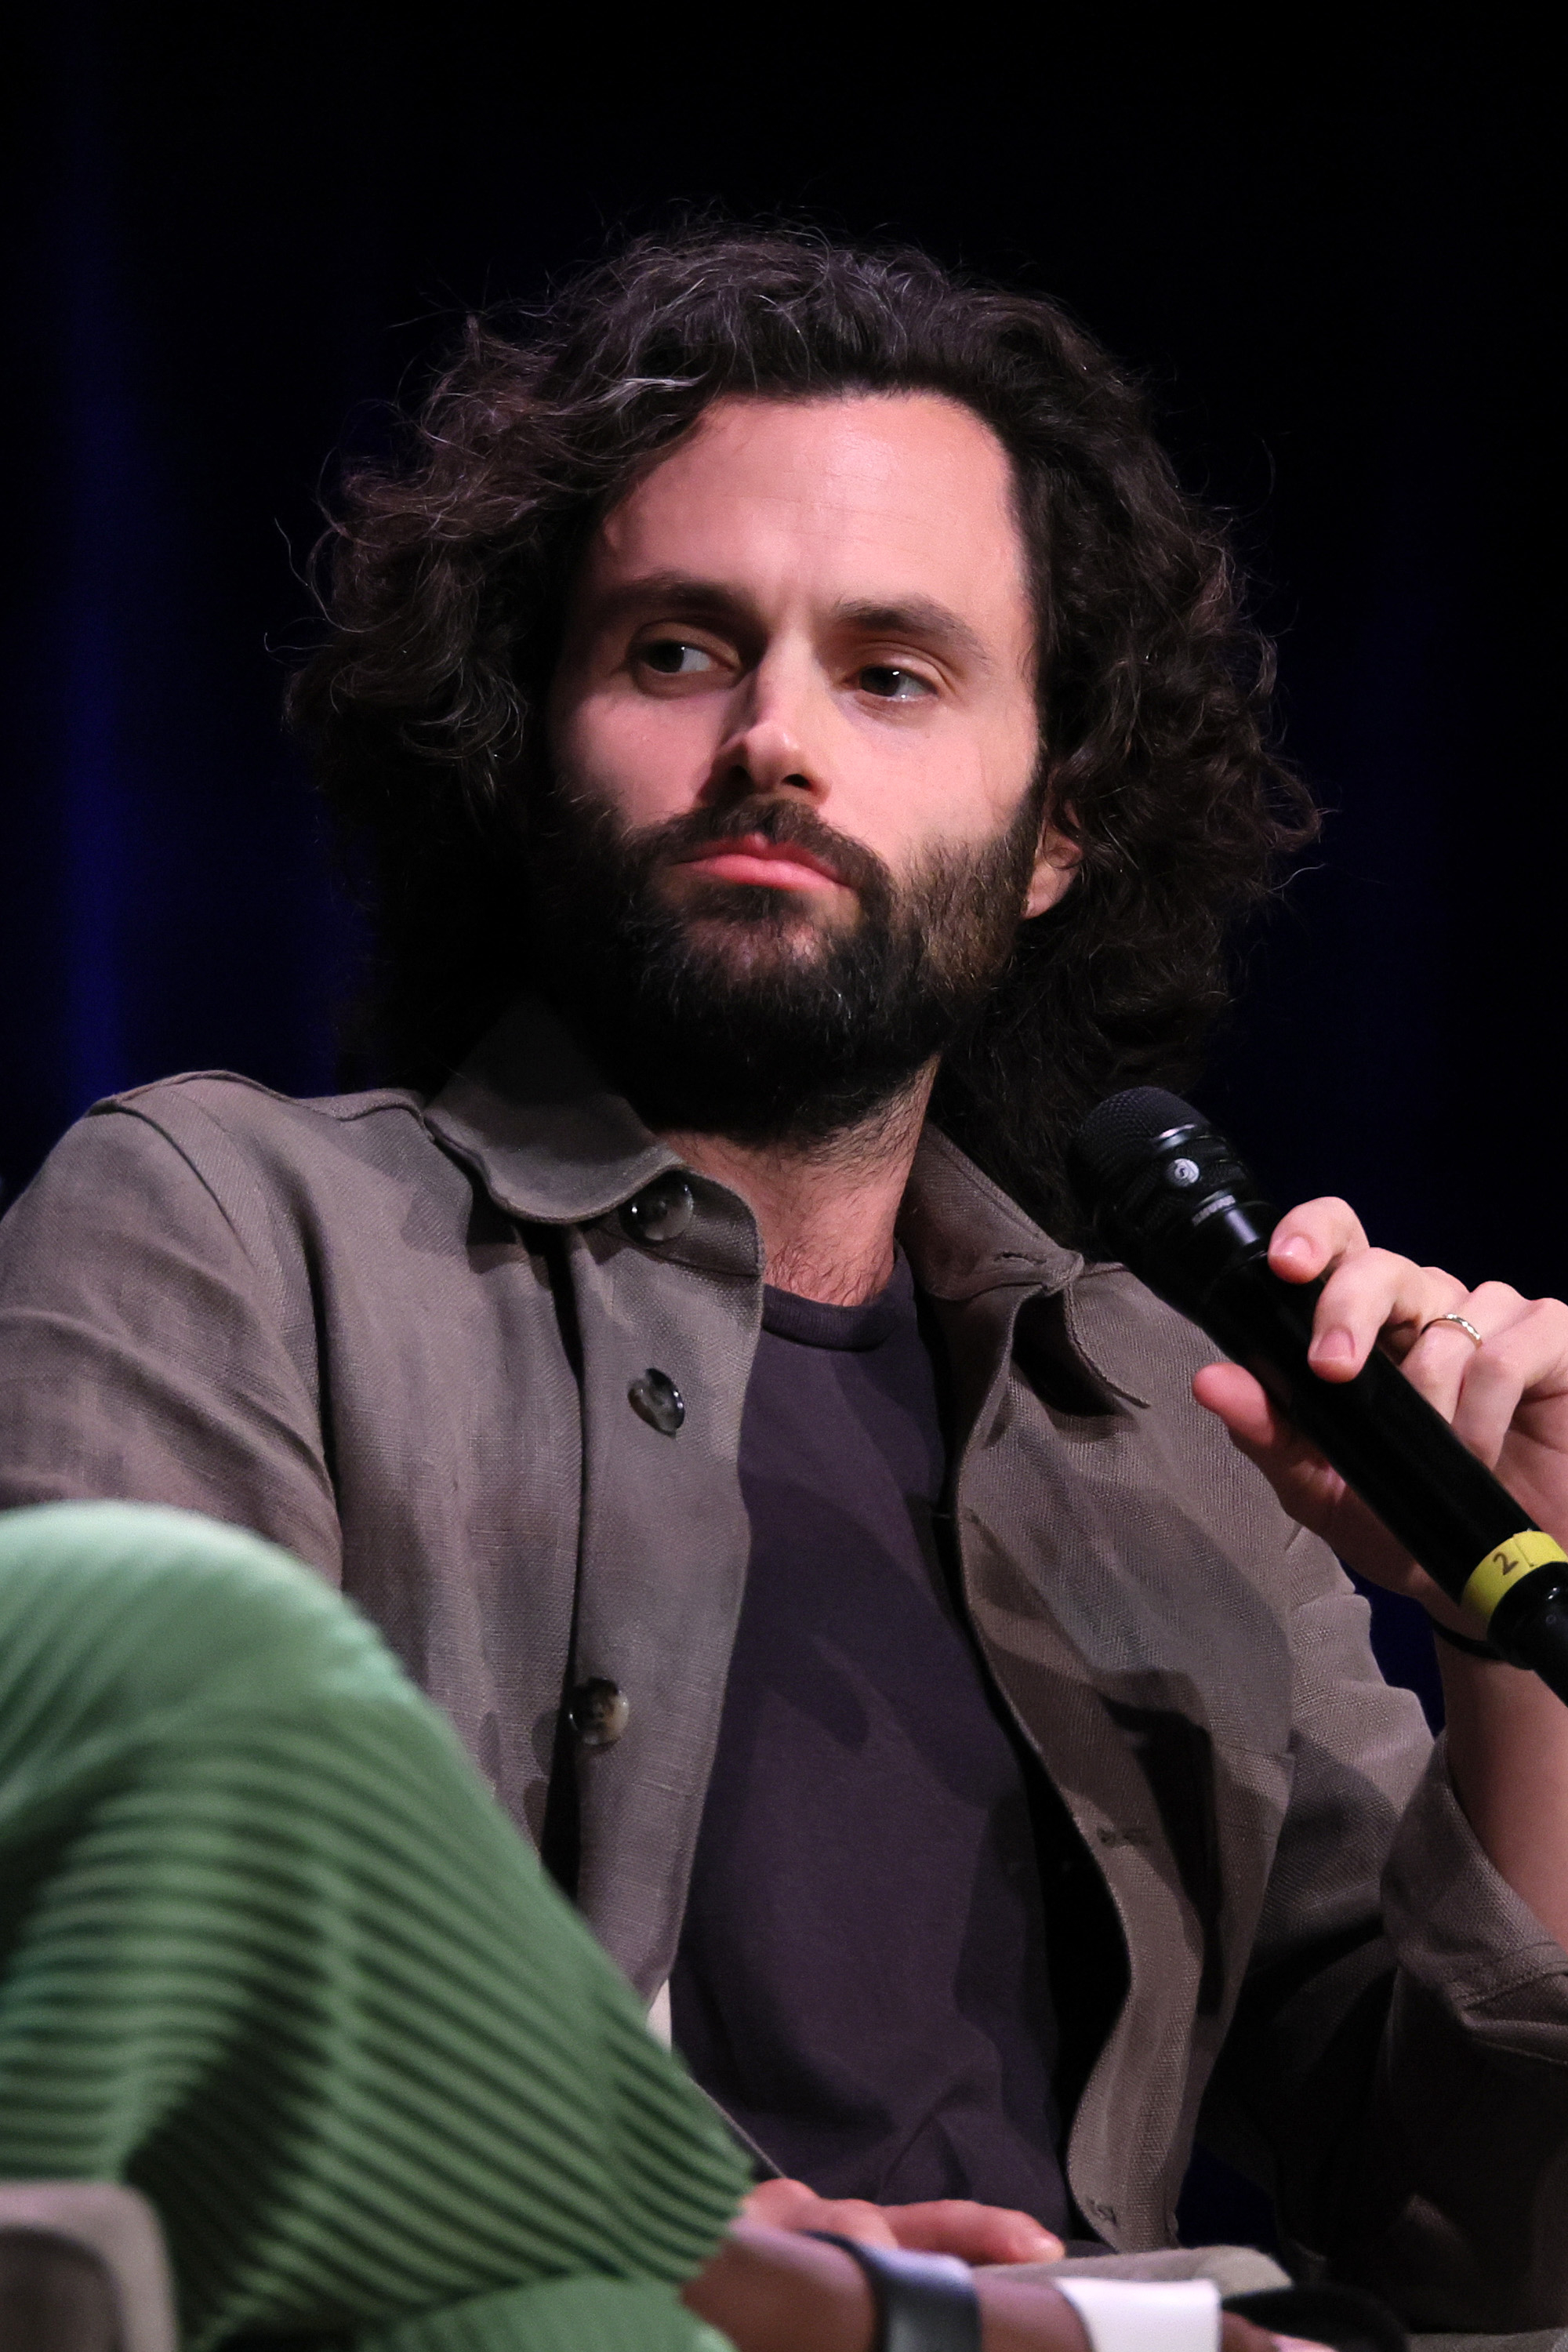 Penn holding a microphone, wearing a buttoned shirt, sitting at a panel